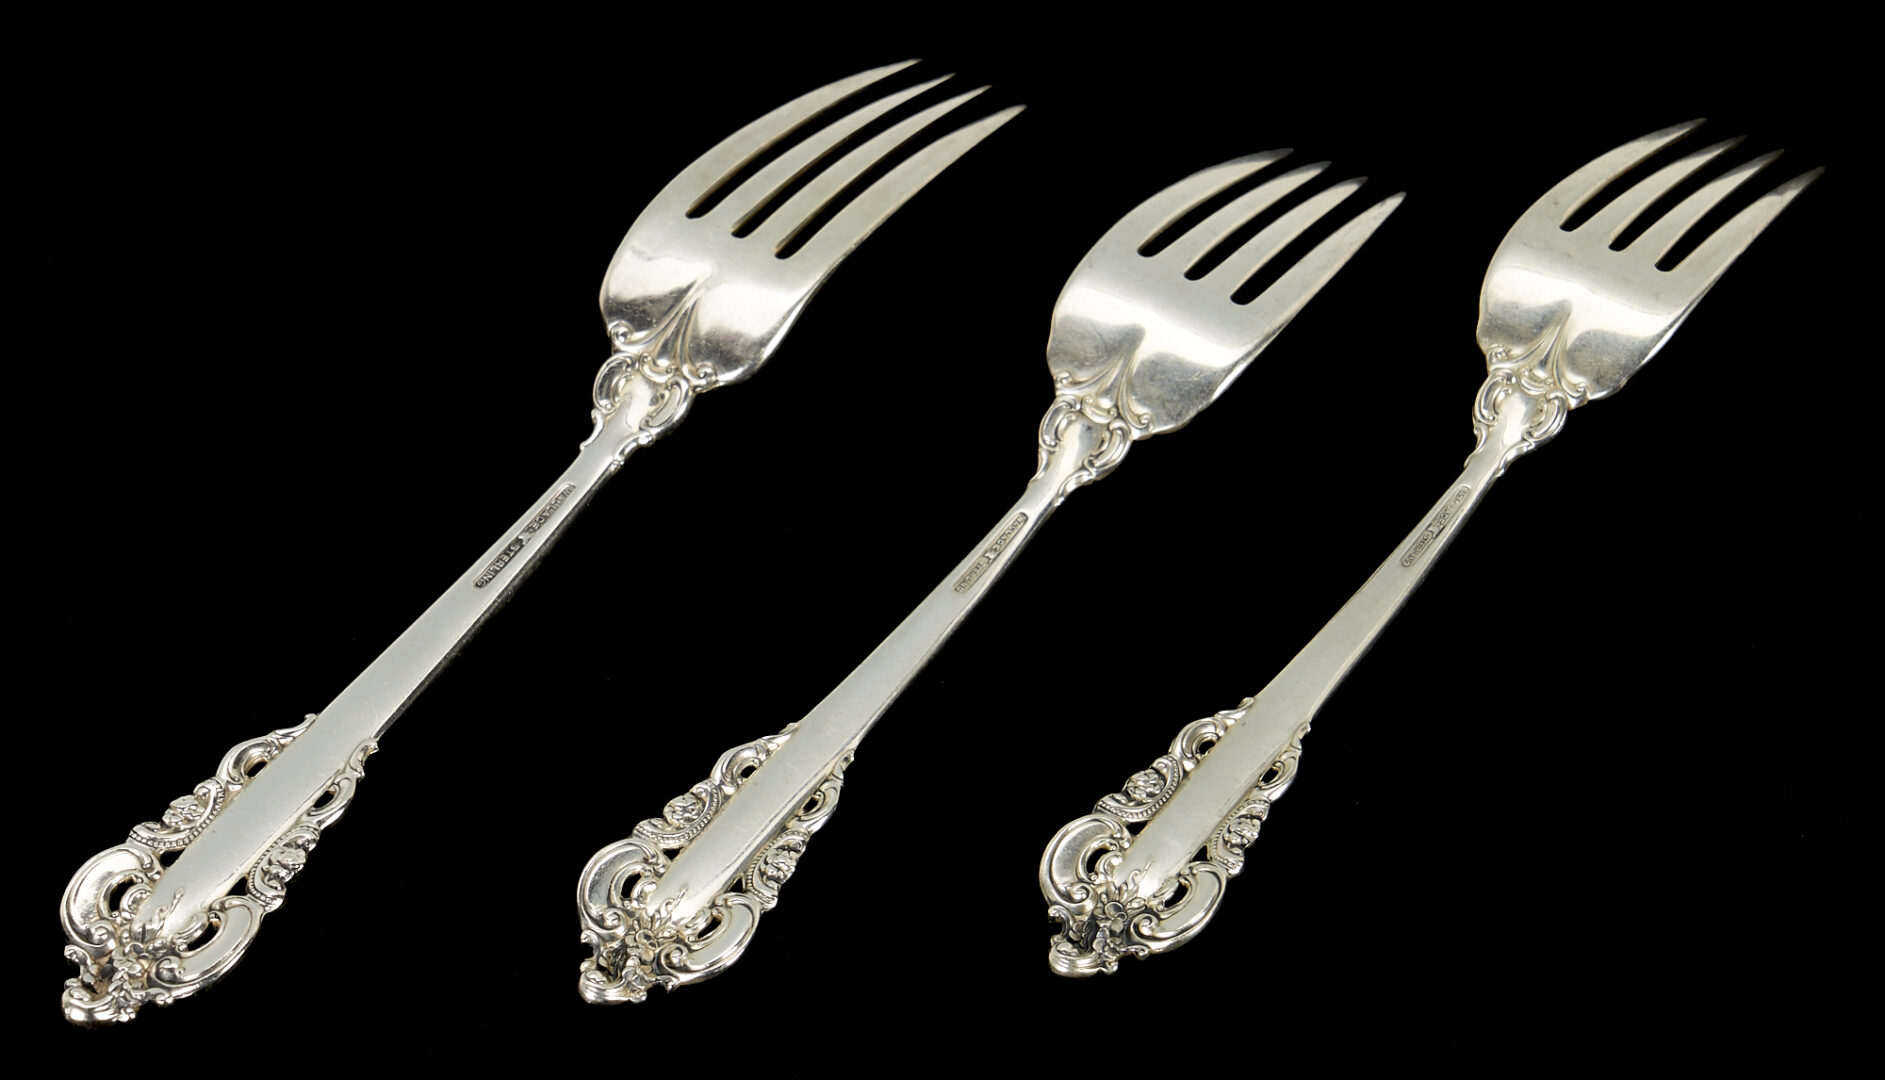 Lot 243: 89 pcs. Wallace Grand Baroque Sterling Flatware, Service for 8